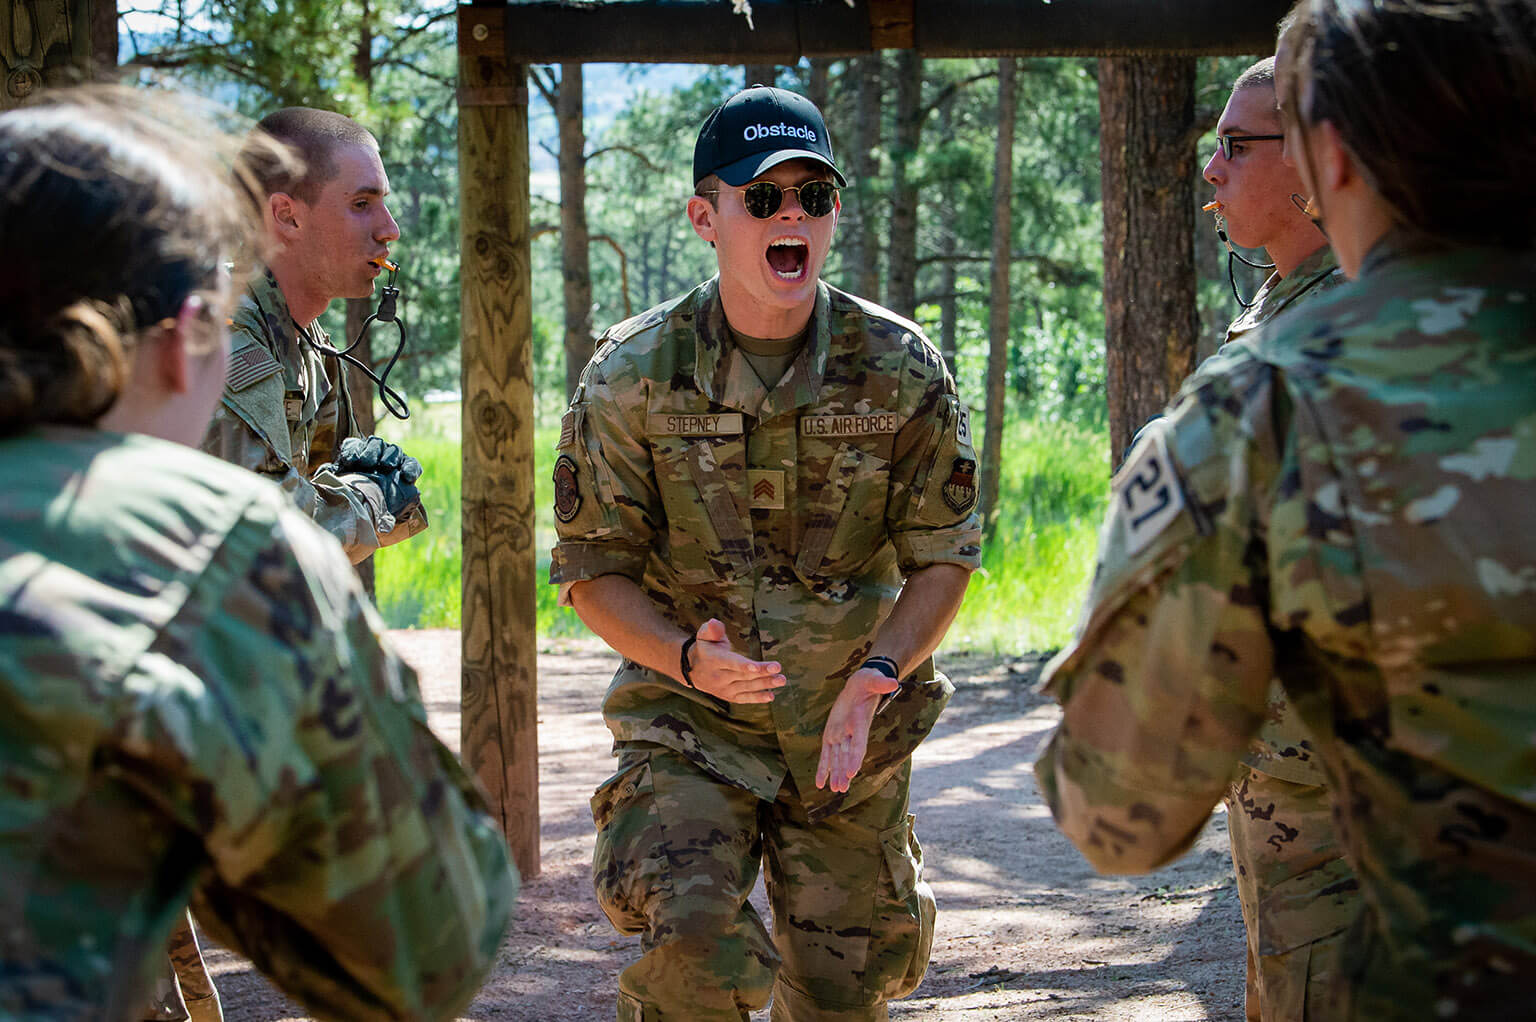 U.S. Air Force Academy Cadet 2nd Class Alexander Stepney corrects basic cadets during the obstacle course